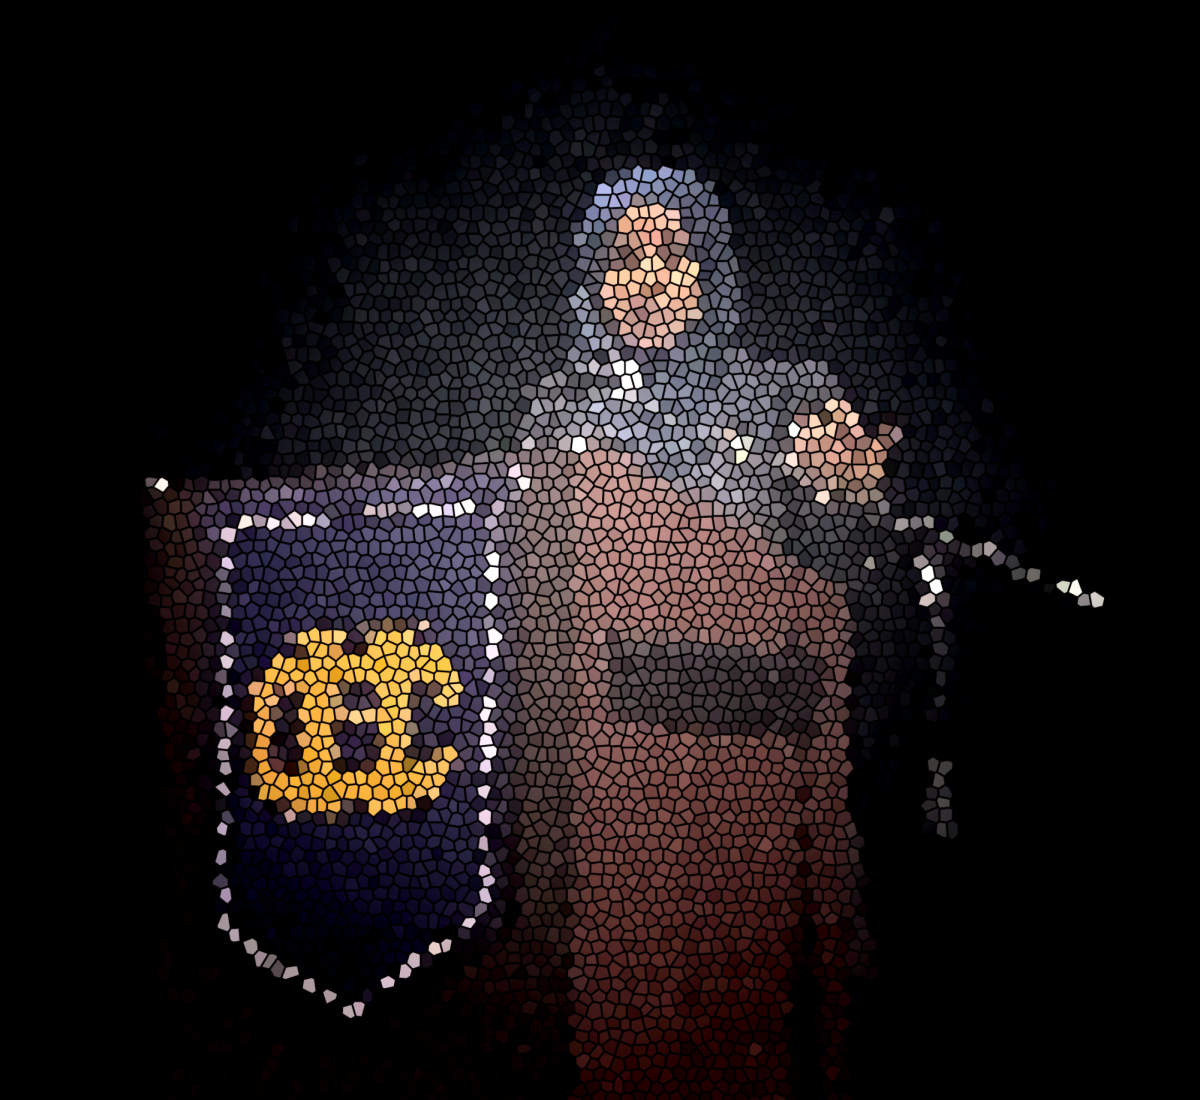 Breaking barriers and speaking truth, Representative Ilhan Omar visited Columbia Heights High Schools Performing Arts Center this September.
